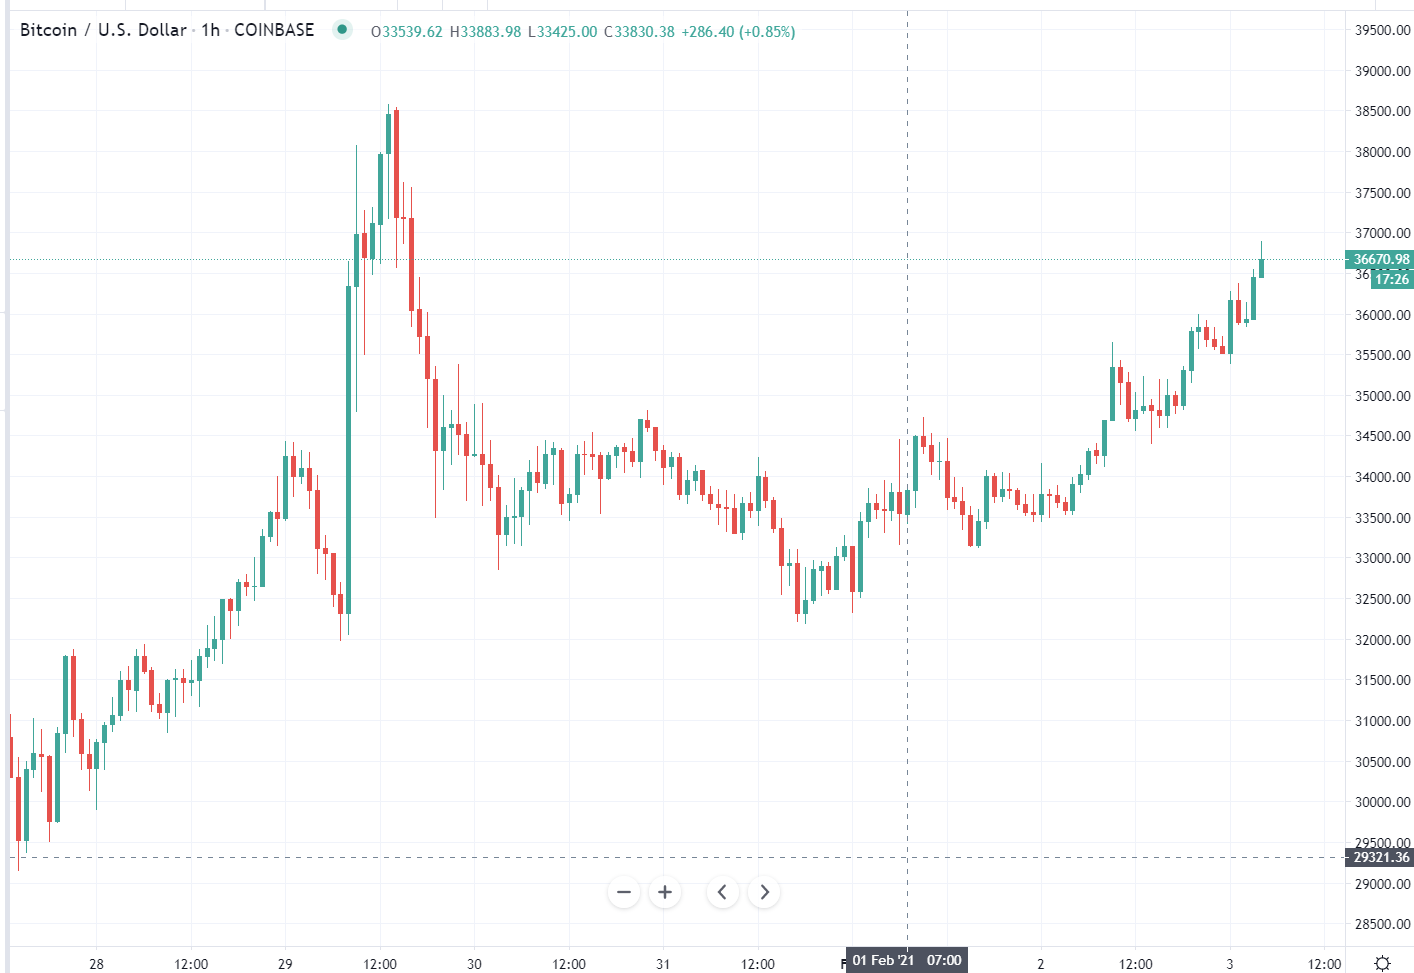 GME collapse, silver a little disappointing ... BTC not caring. Will I have to stand in the naughty corner if I call it the safe haven of the YOLO crowd?